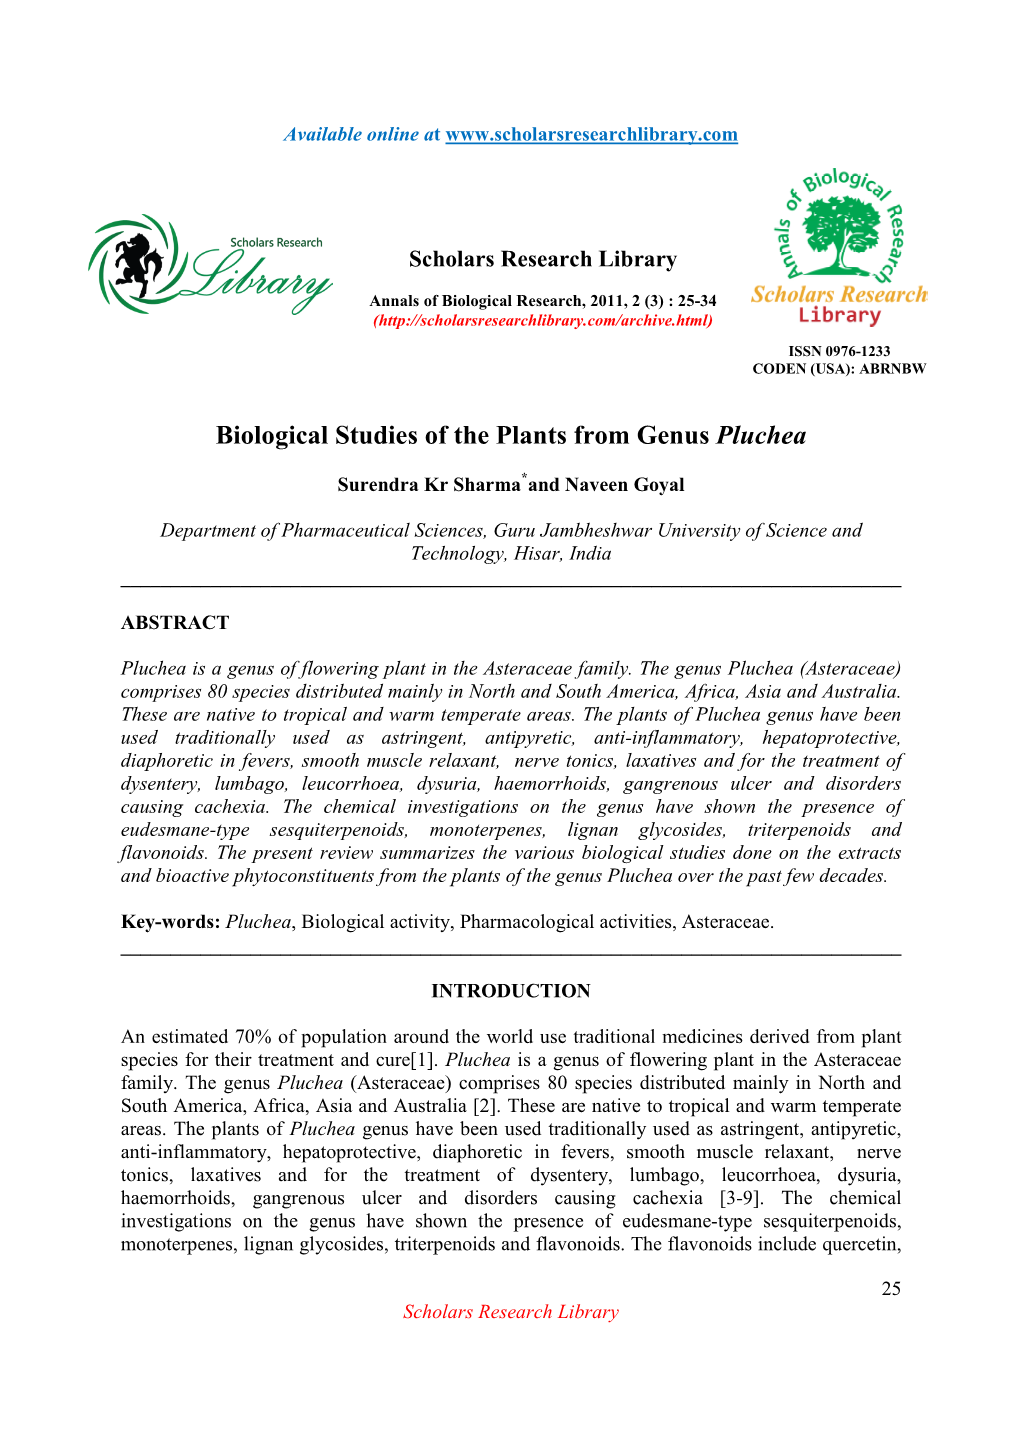 Biological Studies of the Plants from Genus Pluchea